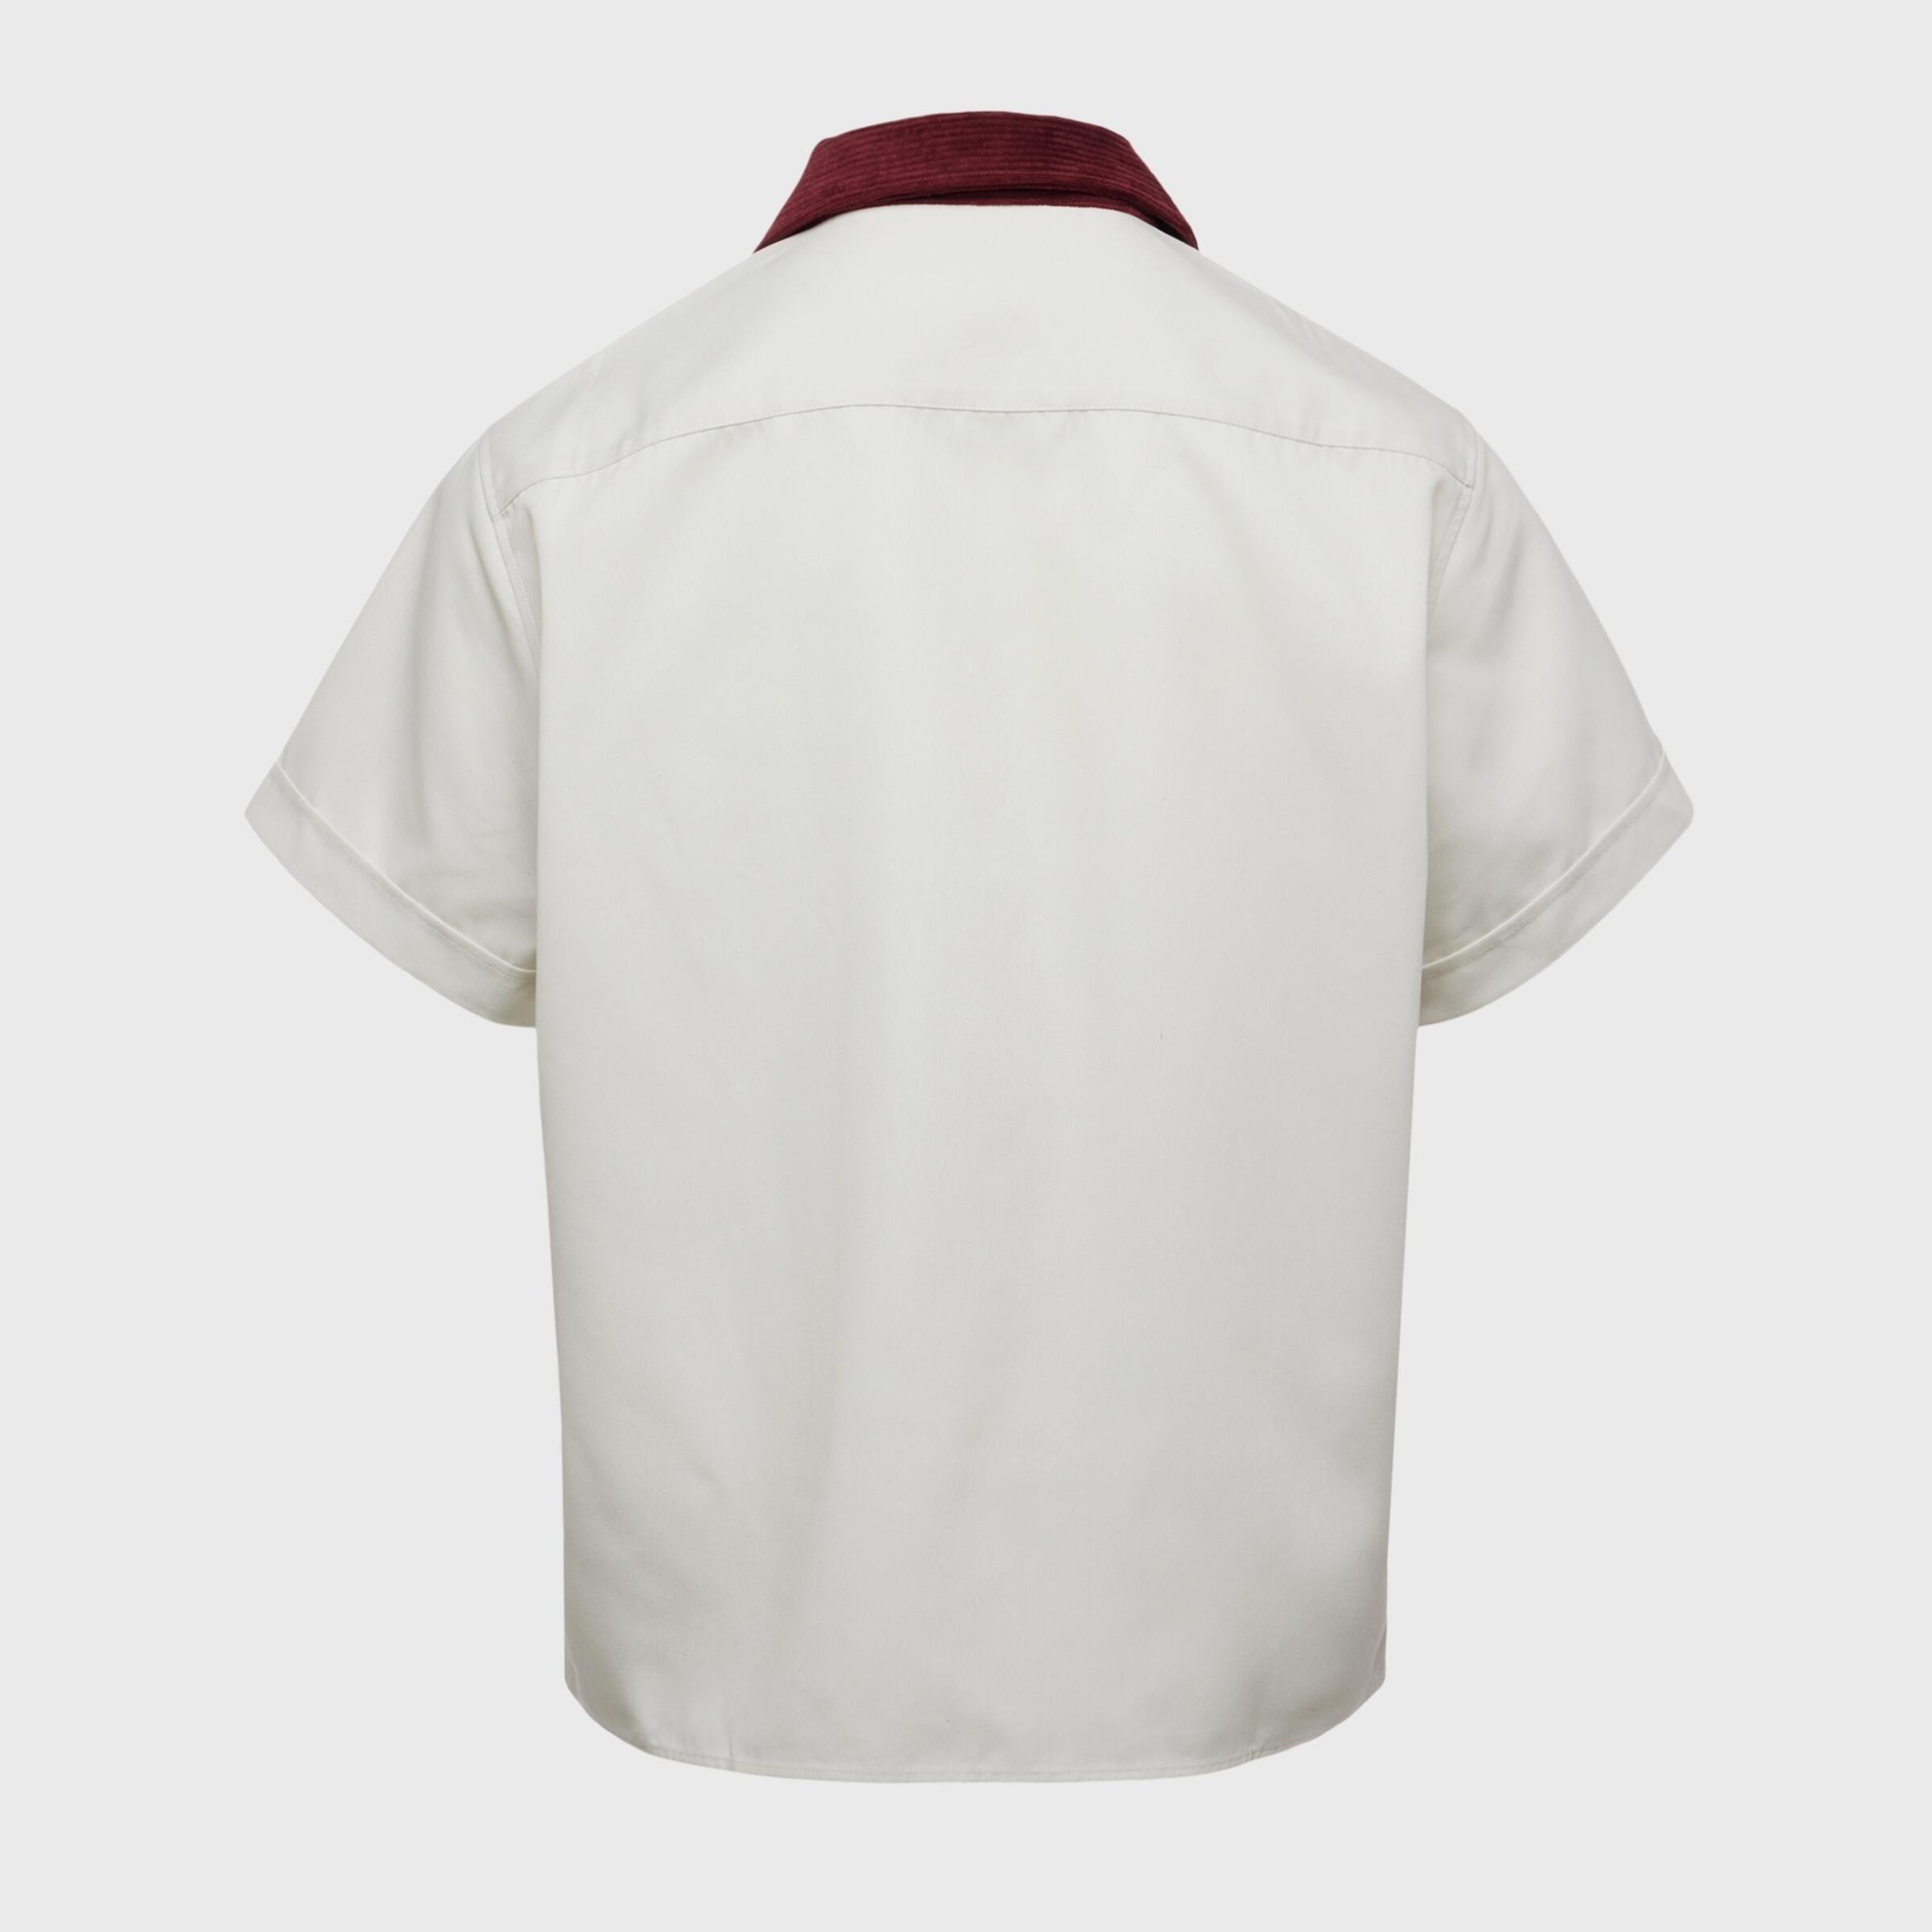 Homme + Femme Button Down Shirt - Maroon Paneled Bowling